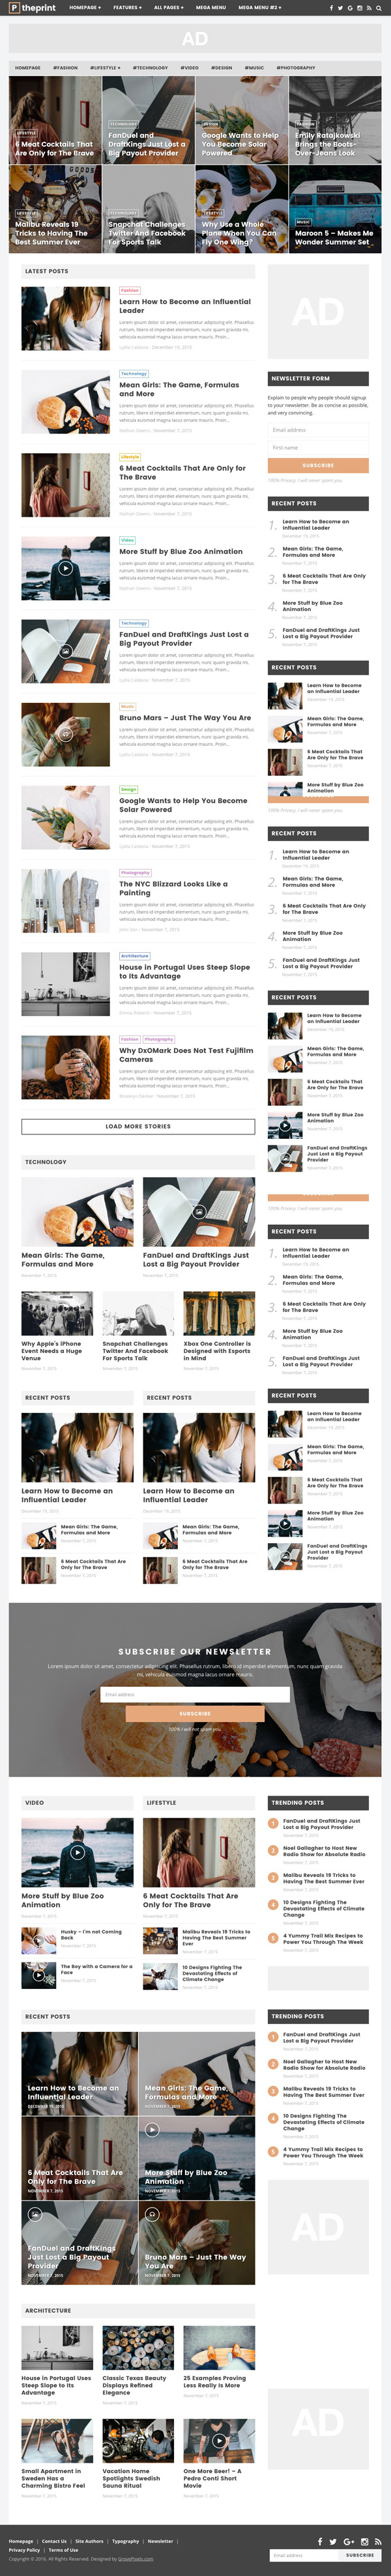 The Print - A Theme for Magazines and Simple Blogs